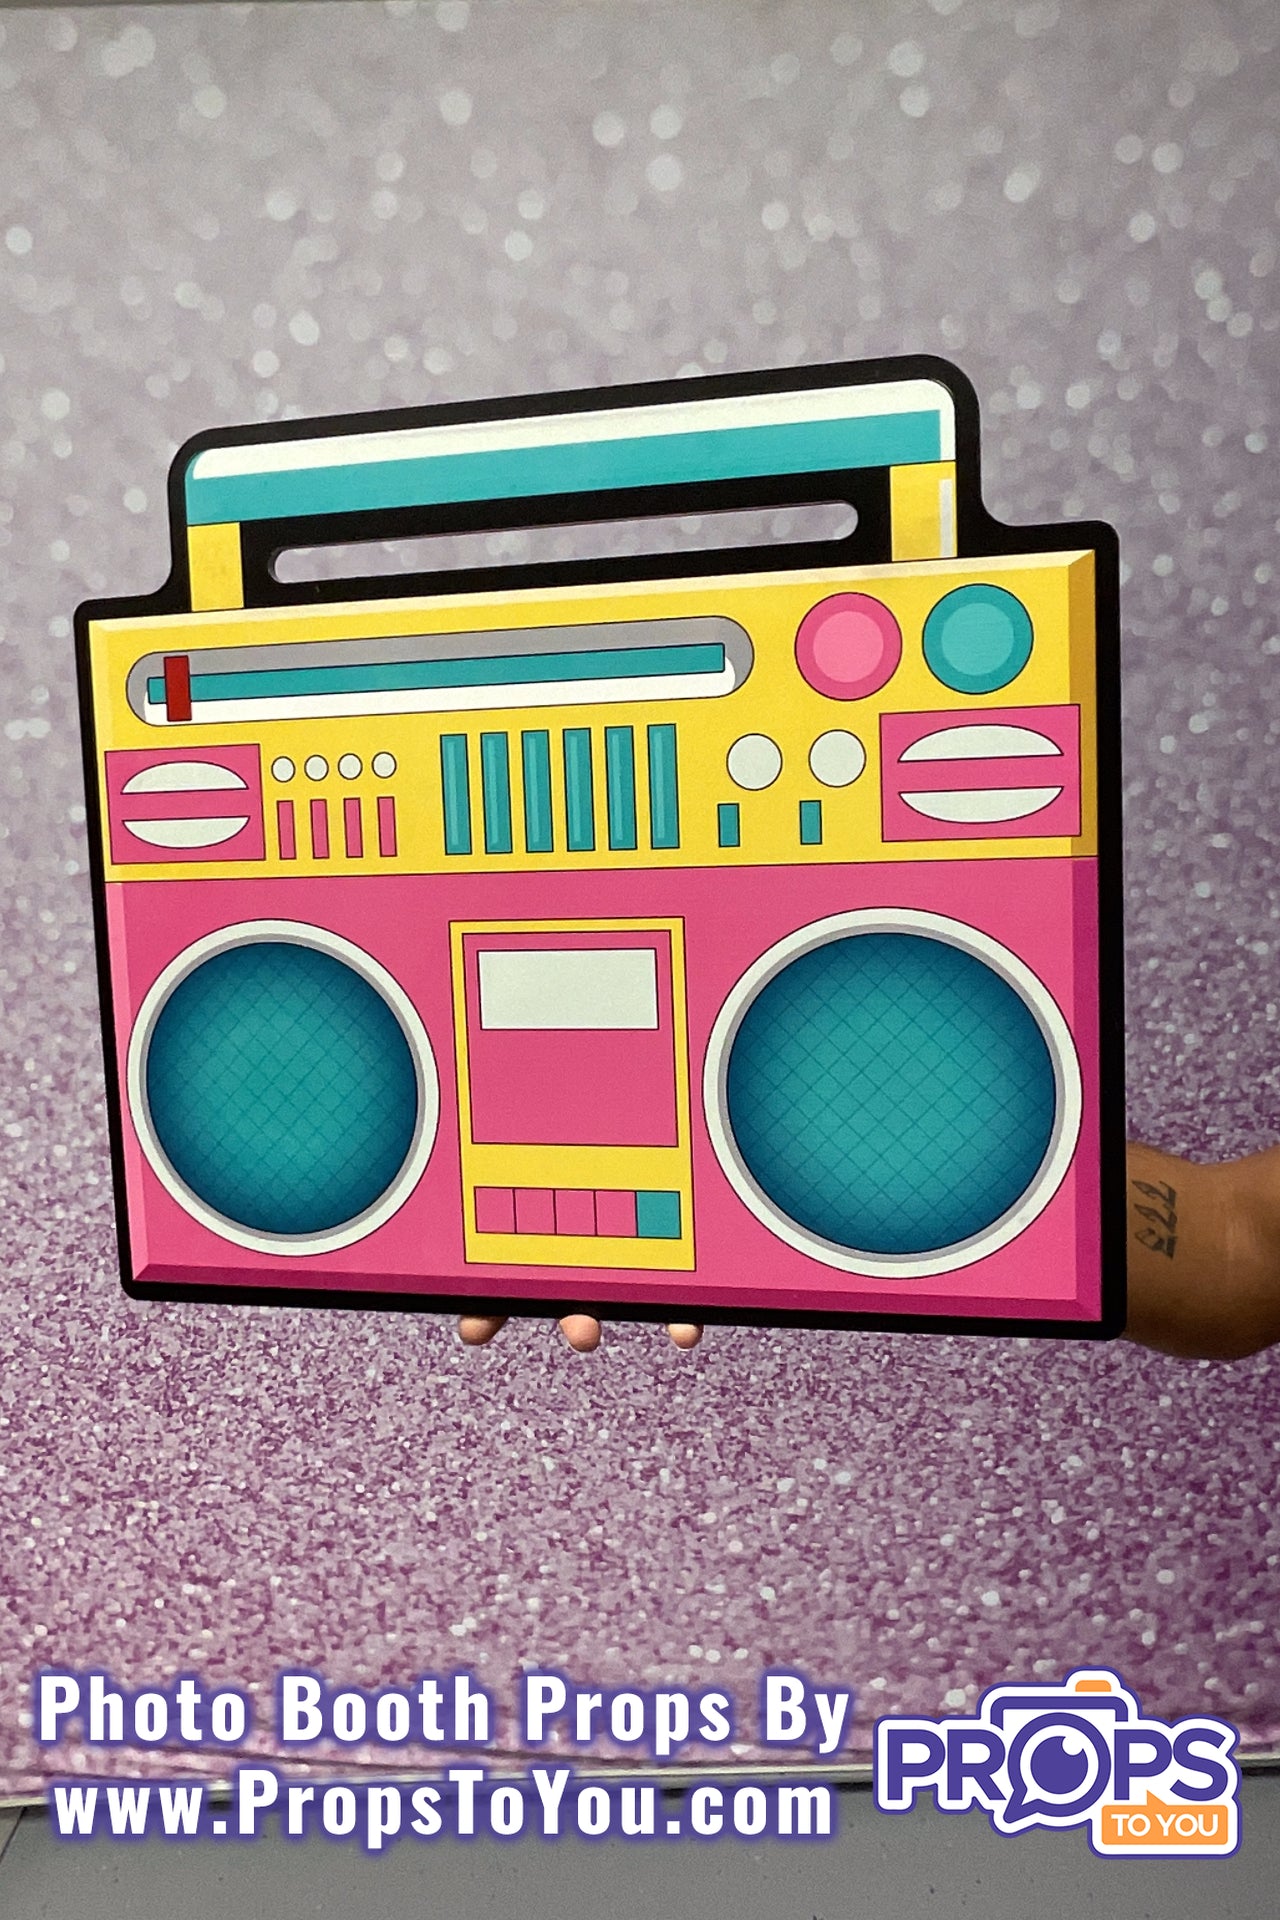 HUGE Props: 1980's! Pink/Black Boom Box (Stereo) Photo Booth Prop